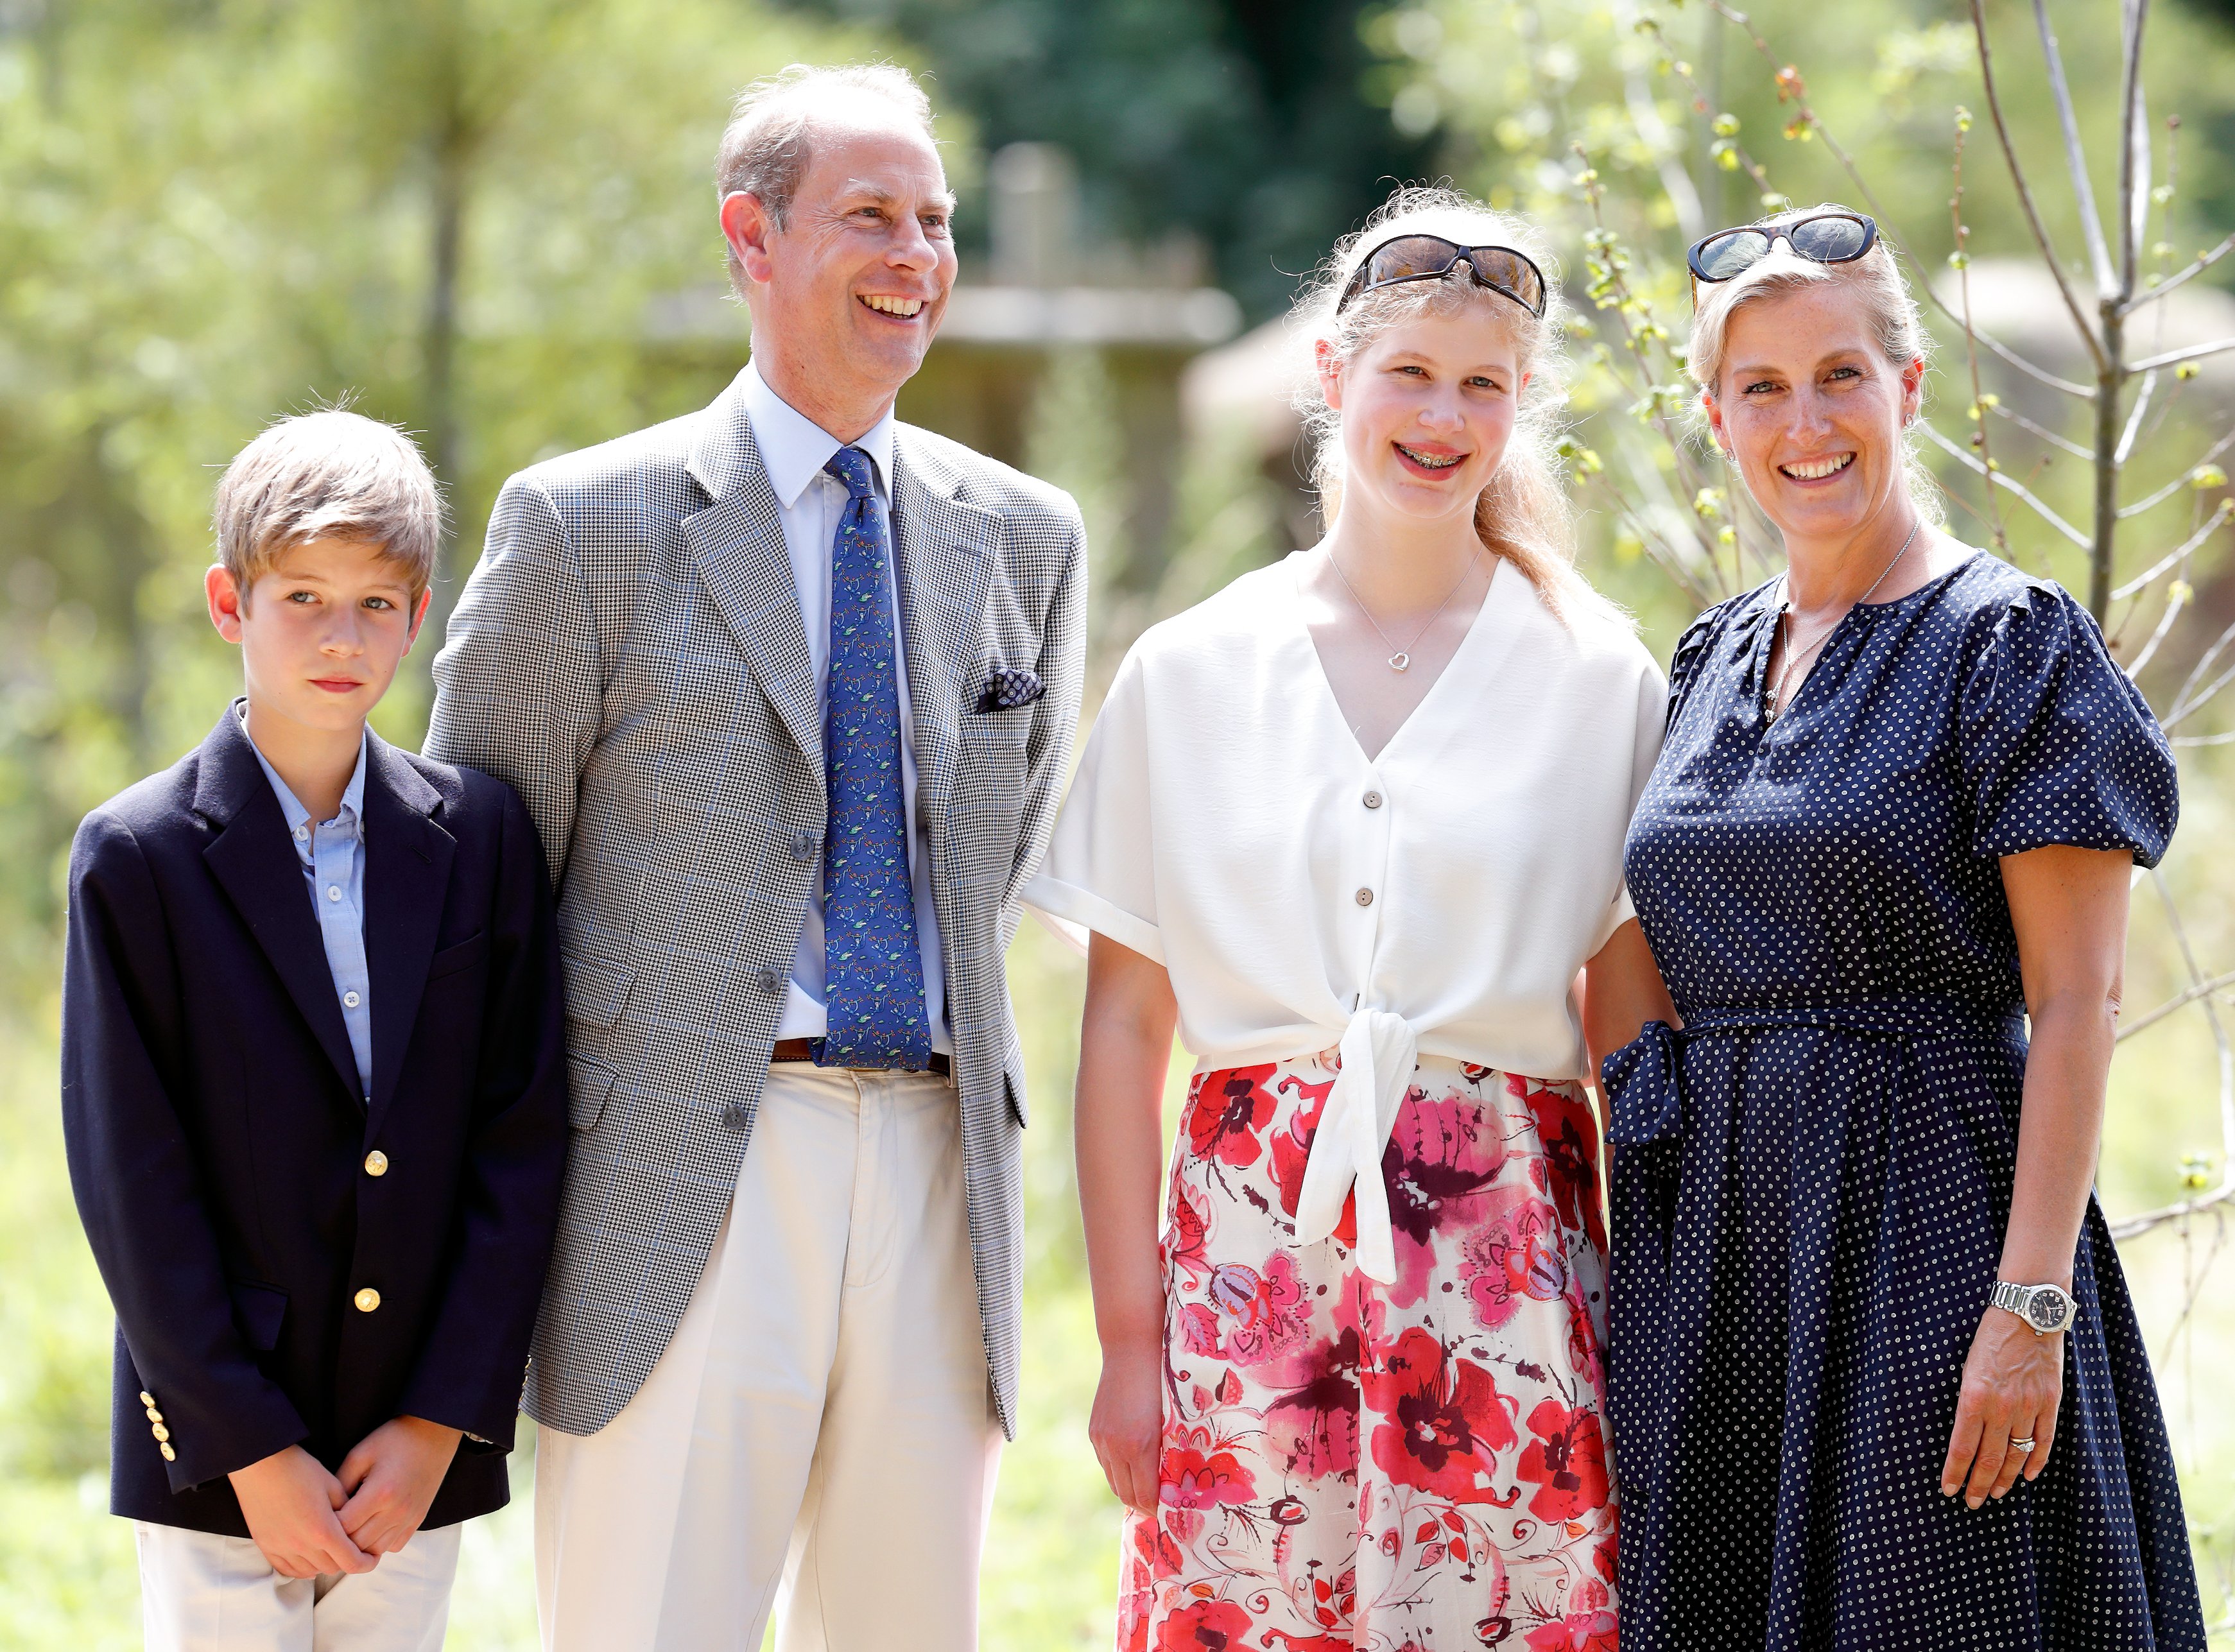 James, Viscount Severn, Prinz Edward, Earl of Wessex, Lady Louise Windsor und Sophie, Countess of Wessex besuchen The Wild Place Project at Bristol Zoo am 23. Juli 2019 in Bristol, England | Quelle: Getty Images